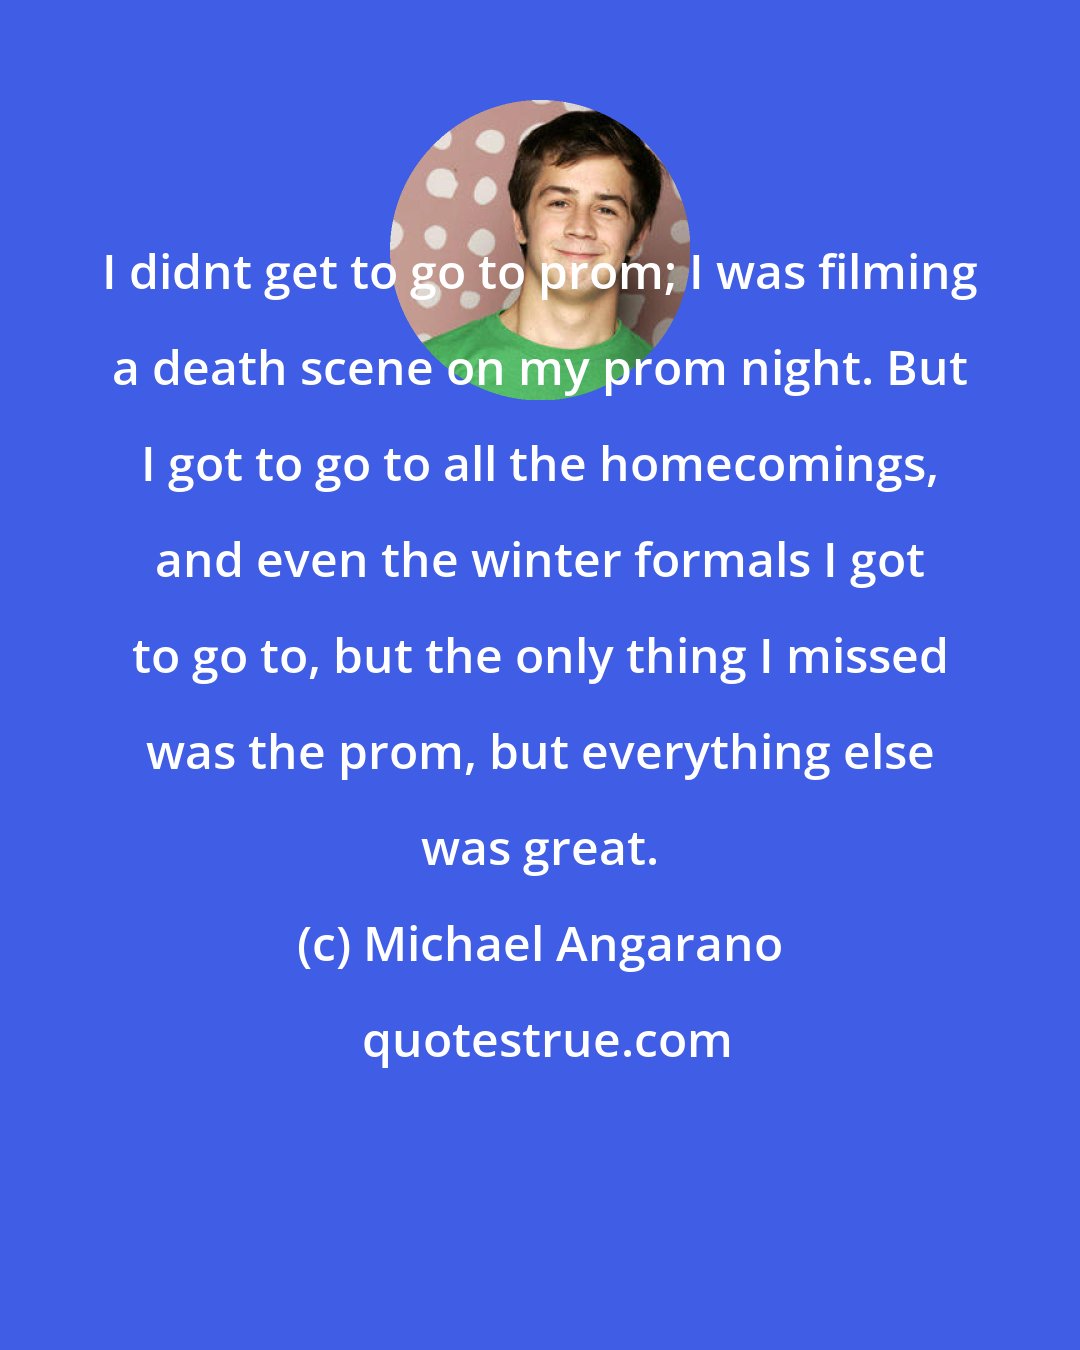 Michael Angarano: I didnt get to go to prom; I was filming a death scene on my prom night. But I got to go to all the homecomings, and even the winter formals I got to go to, but the only thing I missed was the prom, but everything else was great.